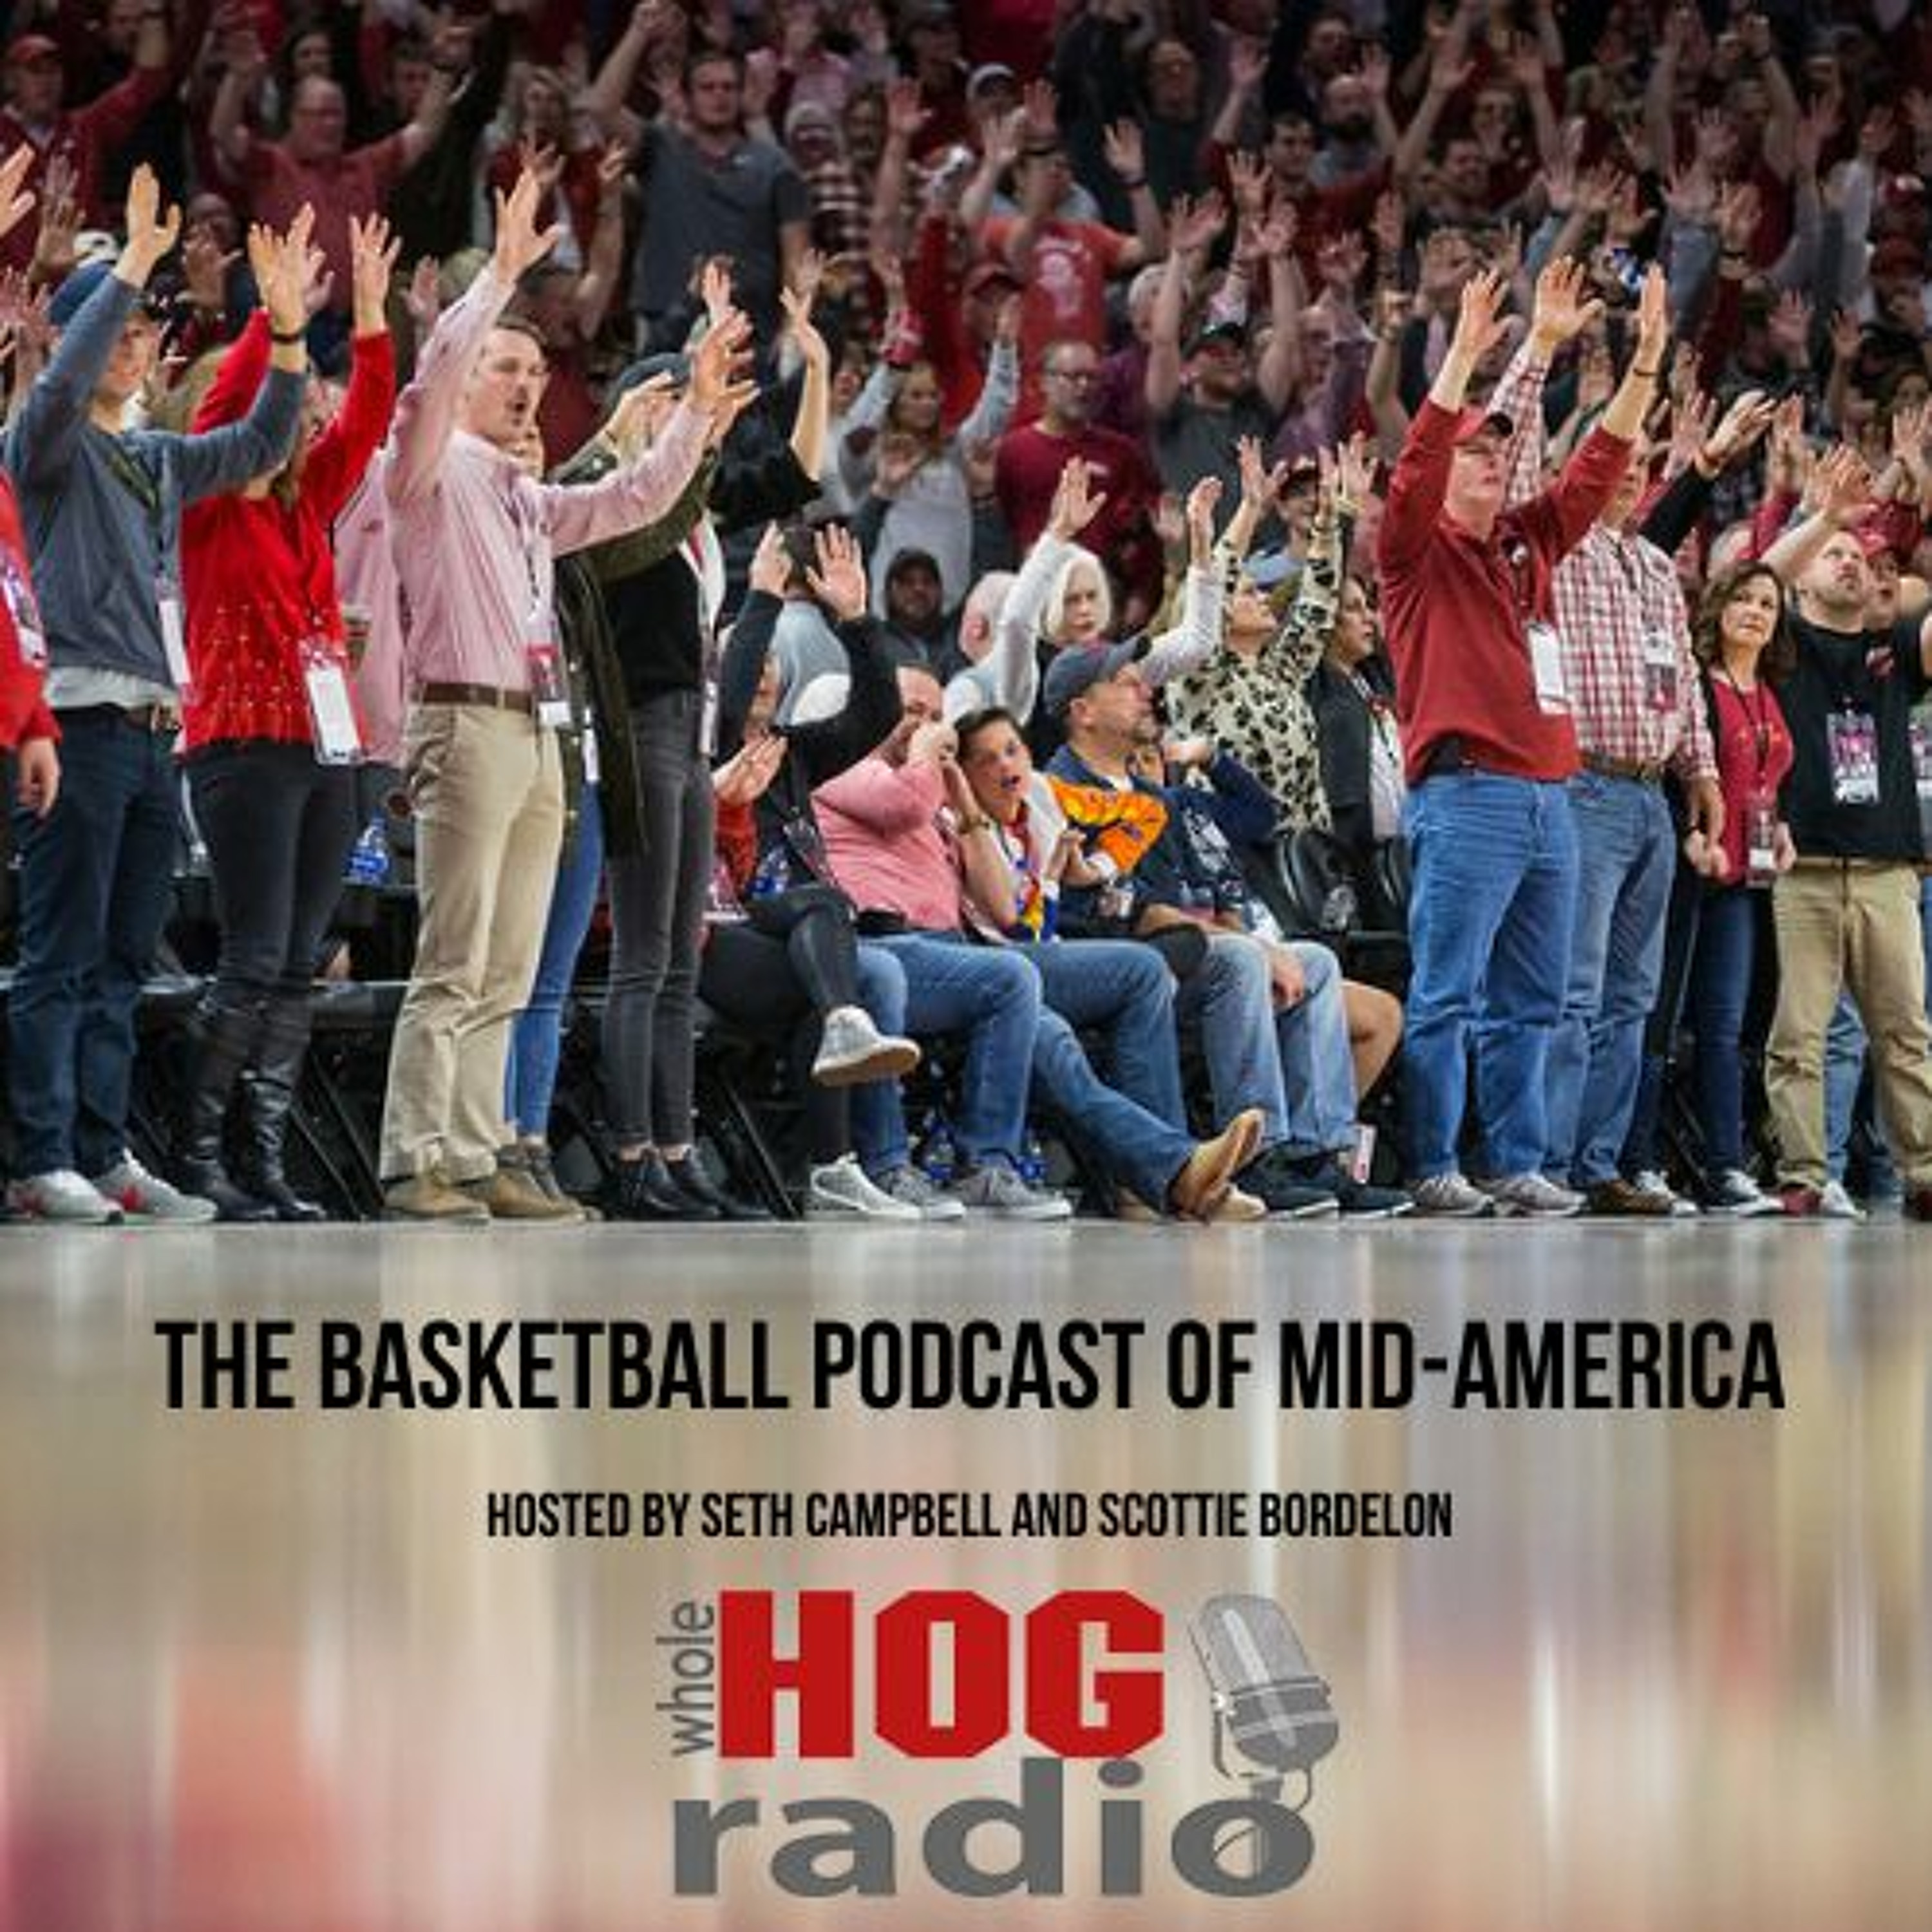 WHS Presents: The Basketball Podcast of Mid-America - Hogs lose 5 straight